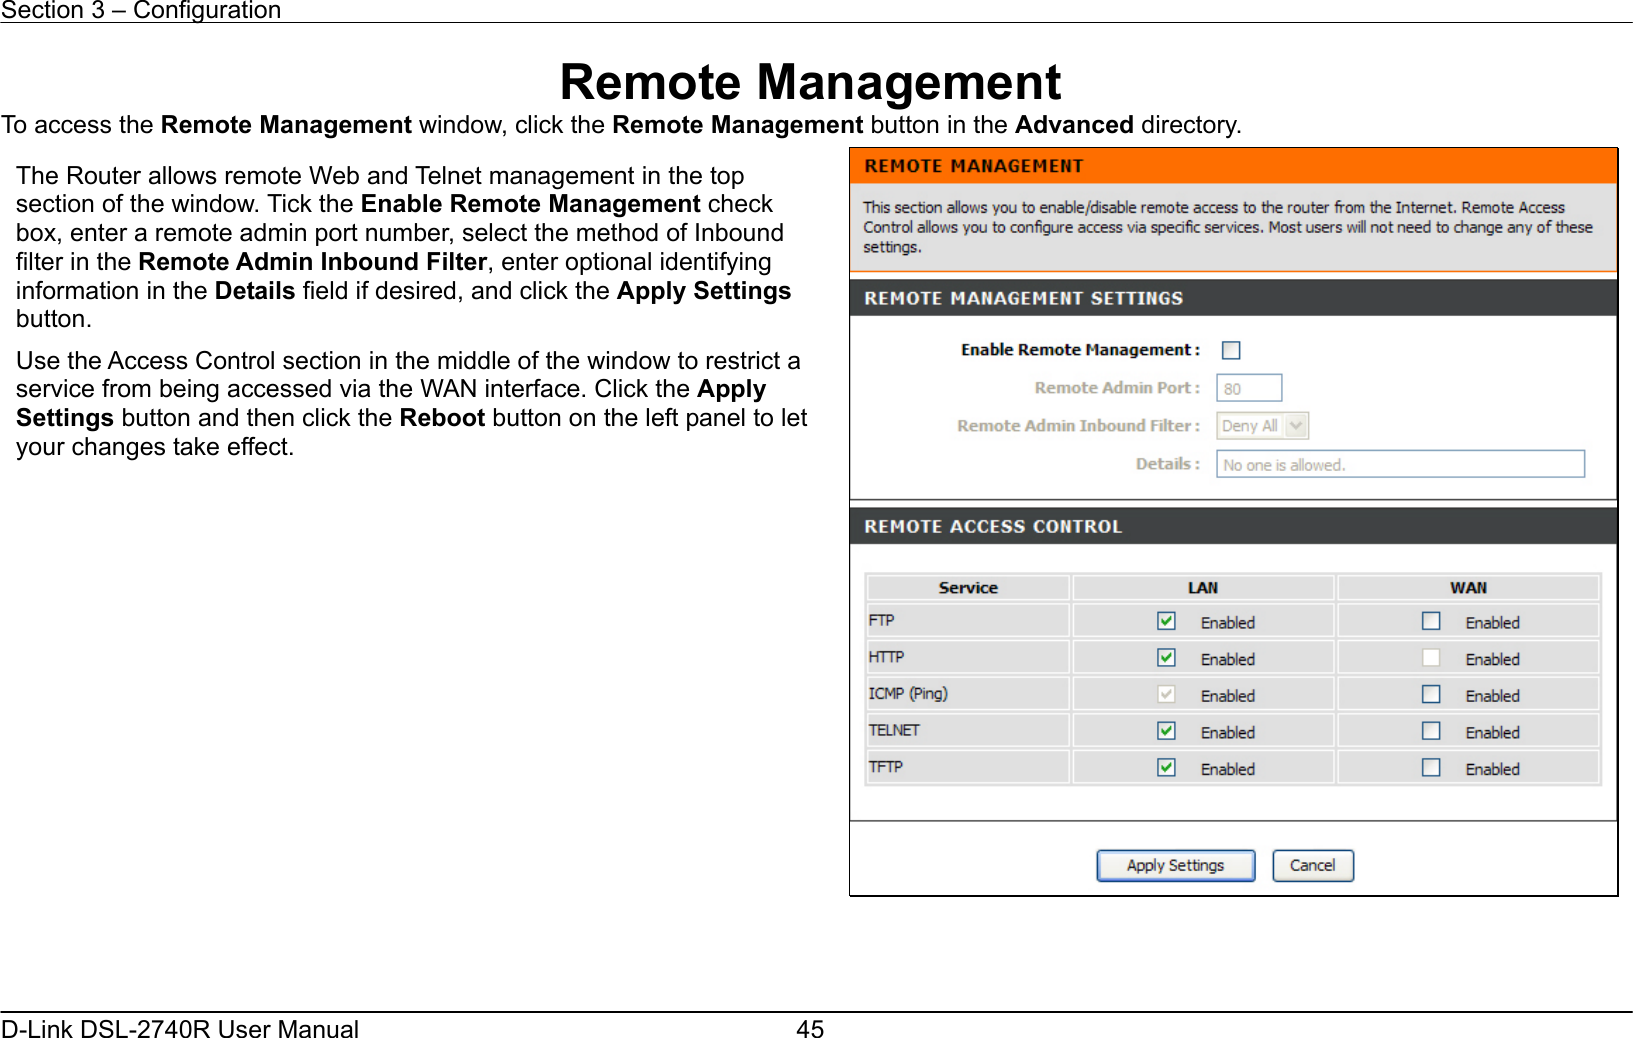 Section 3 – Configuration   D-Link DSL-2740R User Manual  45Remote Management To access the Remote Management window, click the Remote Management button in the Advanced directory.      The Router allows remote Web and Telnet management in the top section of the window. Tick the Enable Remote Management check box, enter a remote admin port number, select the method of Inbound filter in the Remote Admin Inbound Filter, enter optional identifying information in the Details field if desired, and click the Apply Settings button. Use the Access Control section in the middle of the window to restrict a service from being accessed via the WAN interface. Click the Apply Settings button and then click the Reboot button on the left panel to let your changes take effect. 